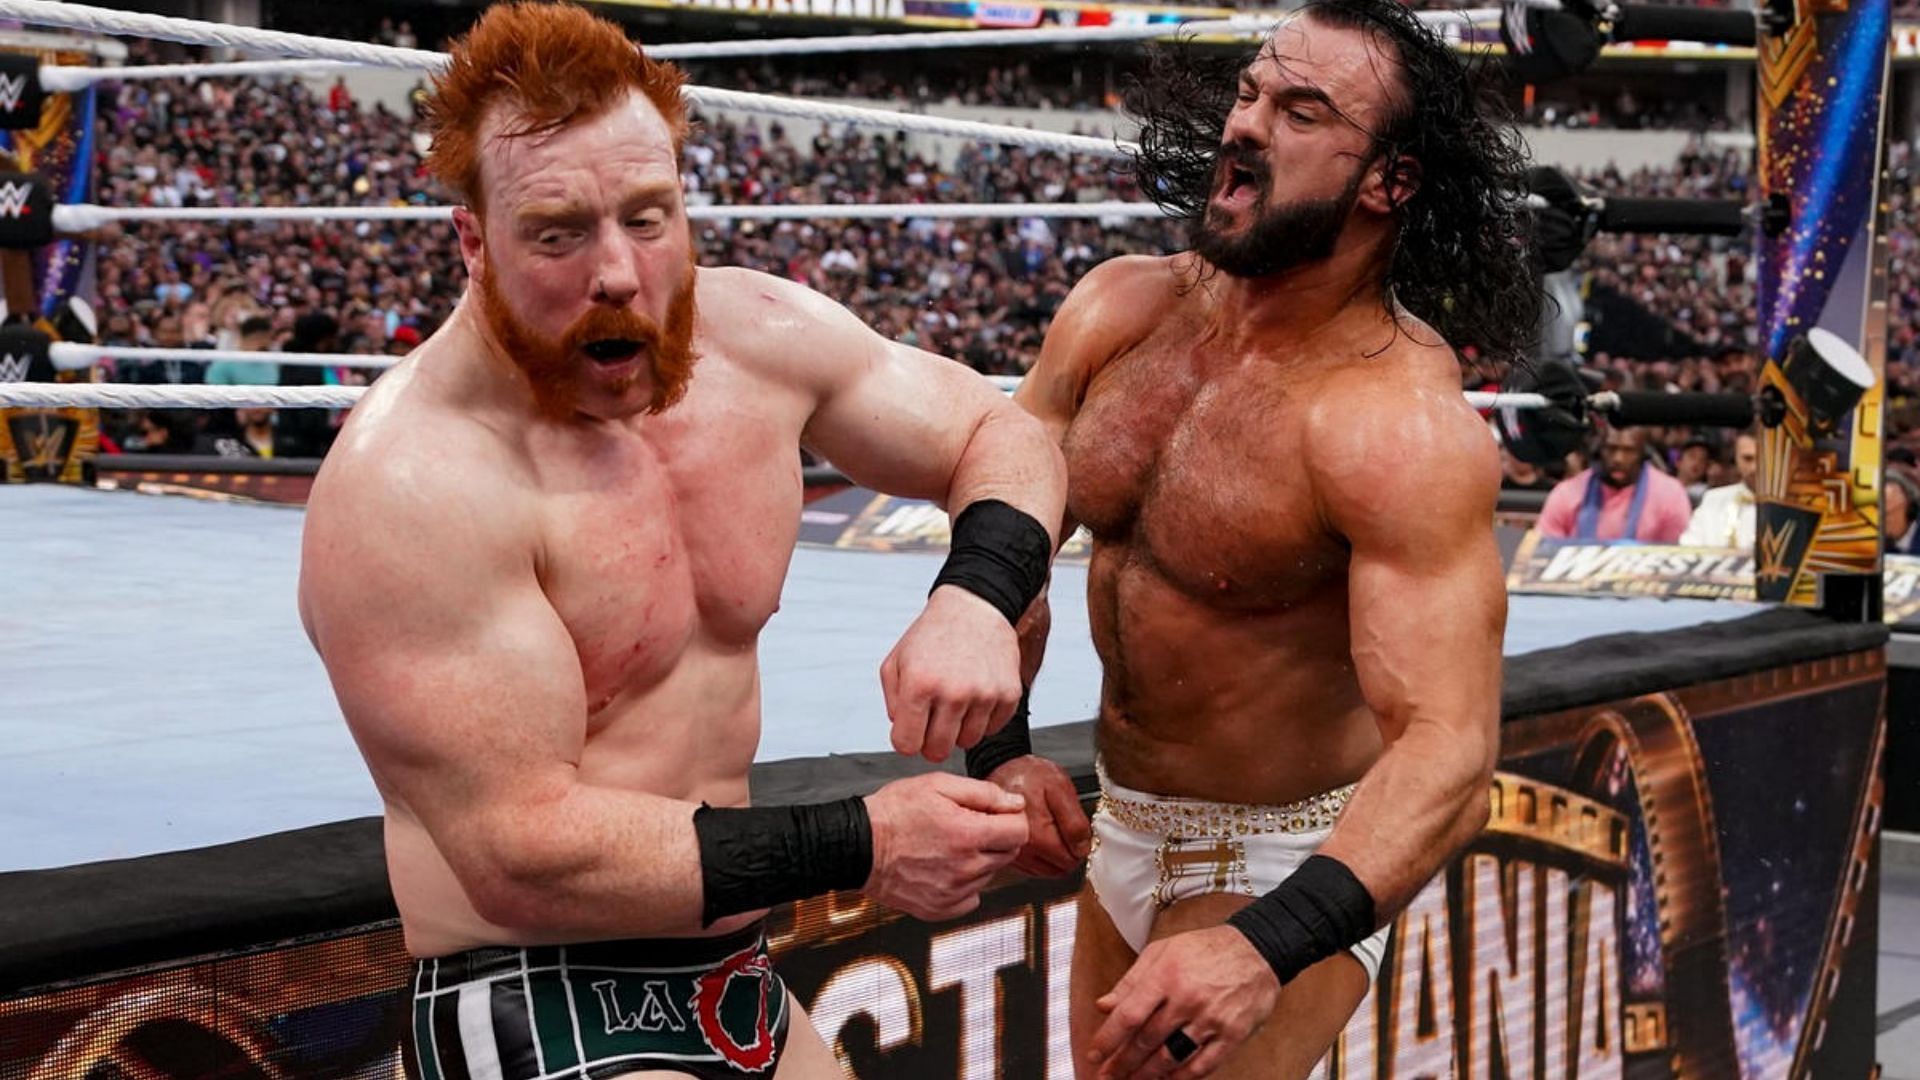 Scene from Drew McIntyre vs. Sheamus vs. Gunther for the WWE Intercontinental Championship at WrestleMania 39.